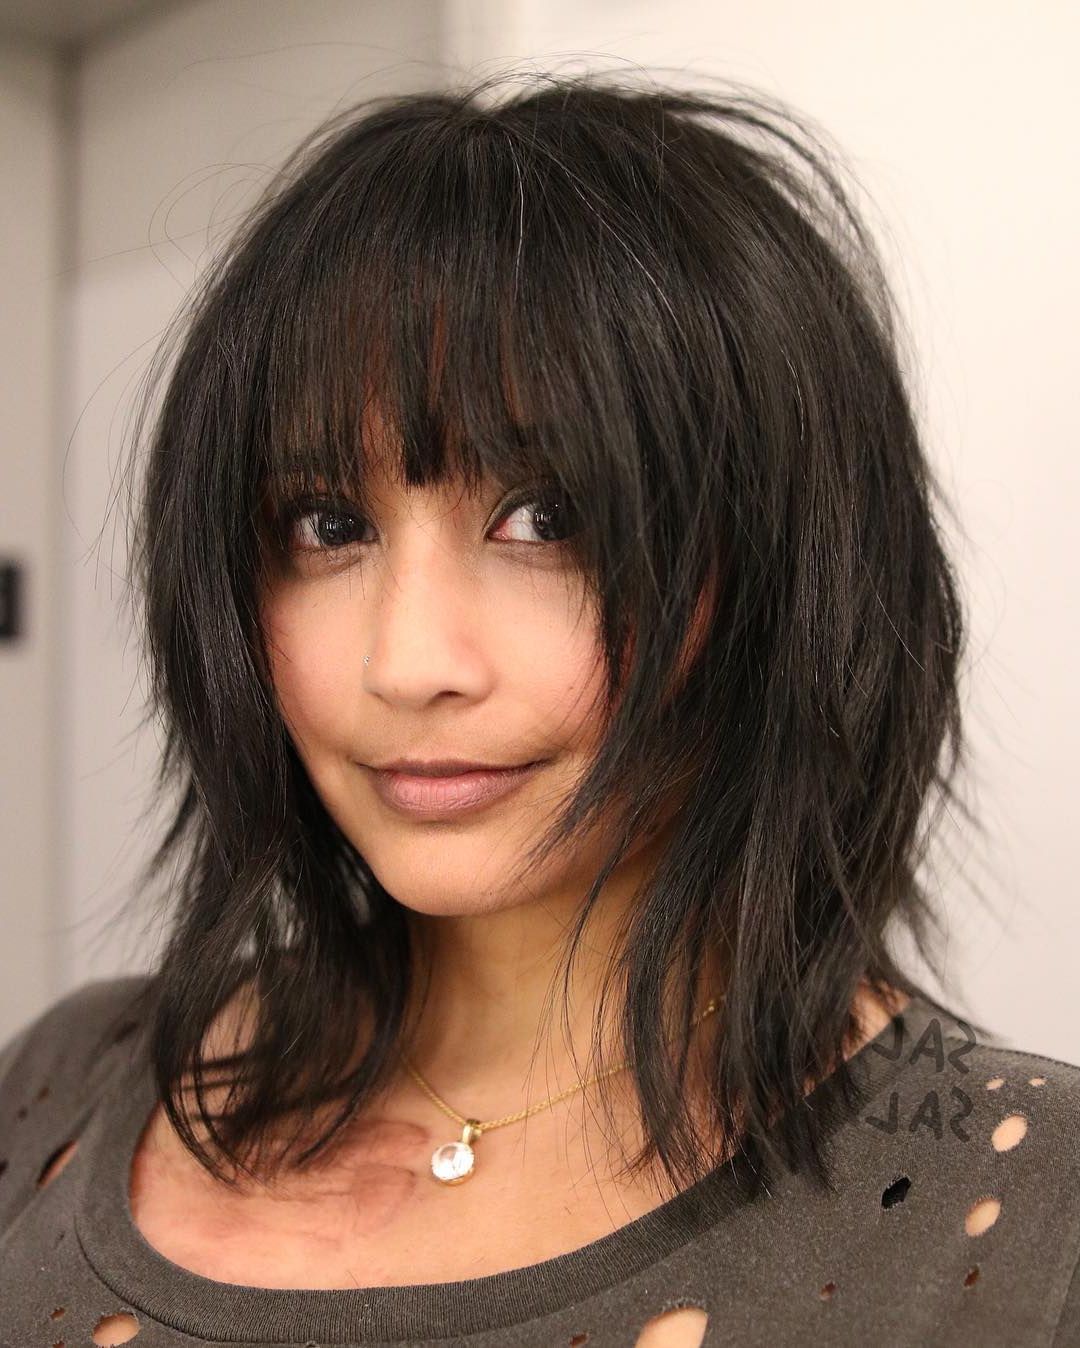 2019 Side Swept Face Framing Layers Hairstyles Within Dark Voluminous Face Framing Shag Cut With Fringe Bangs (View 3 of 20)